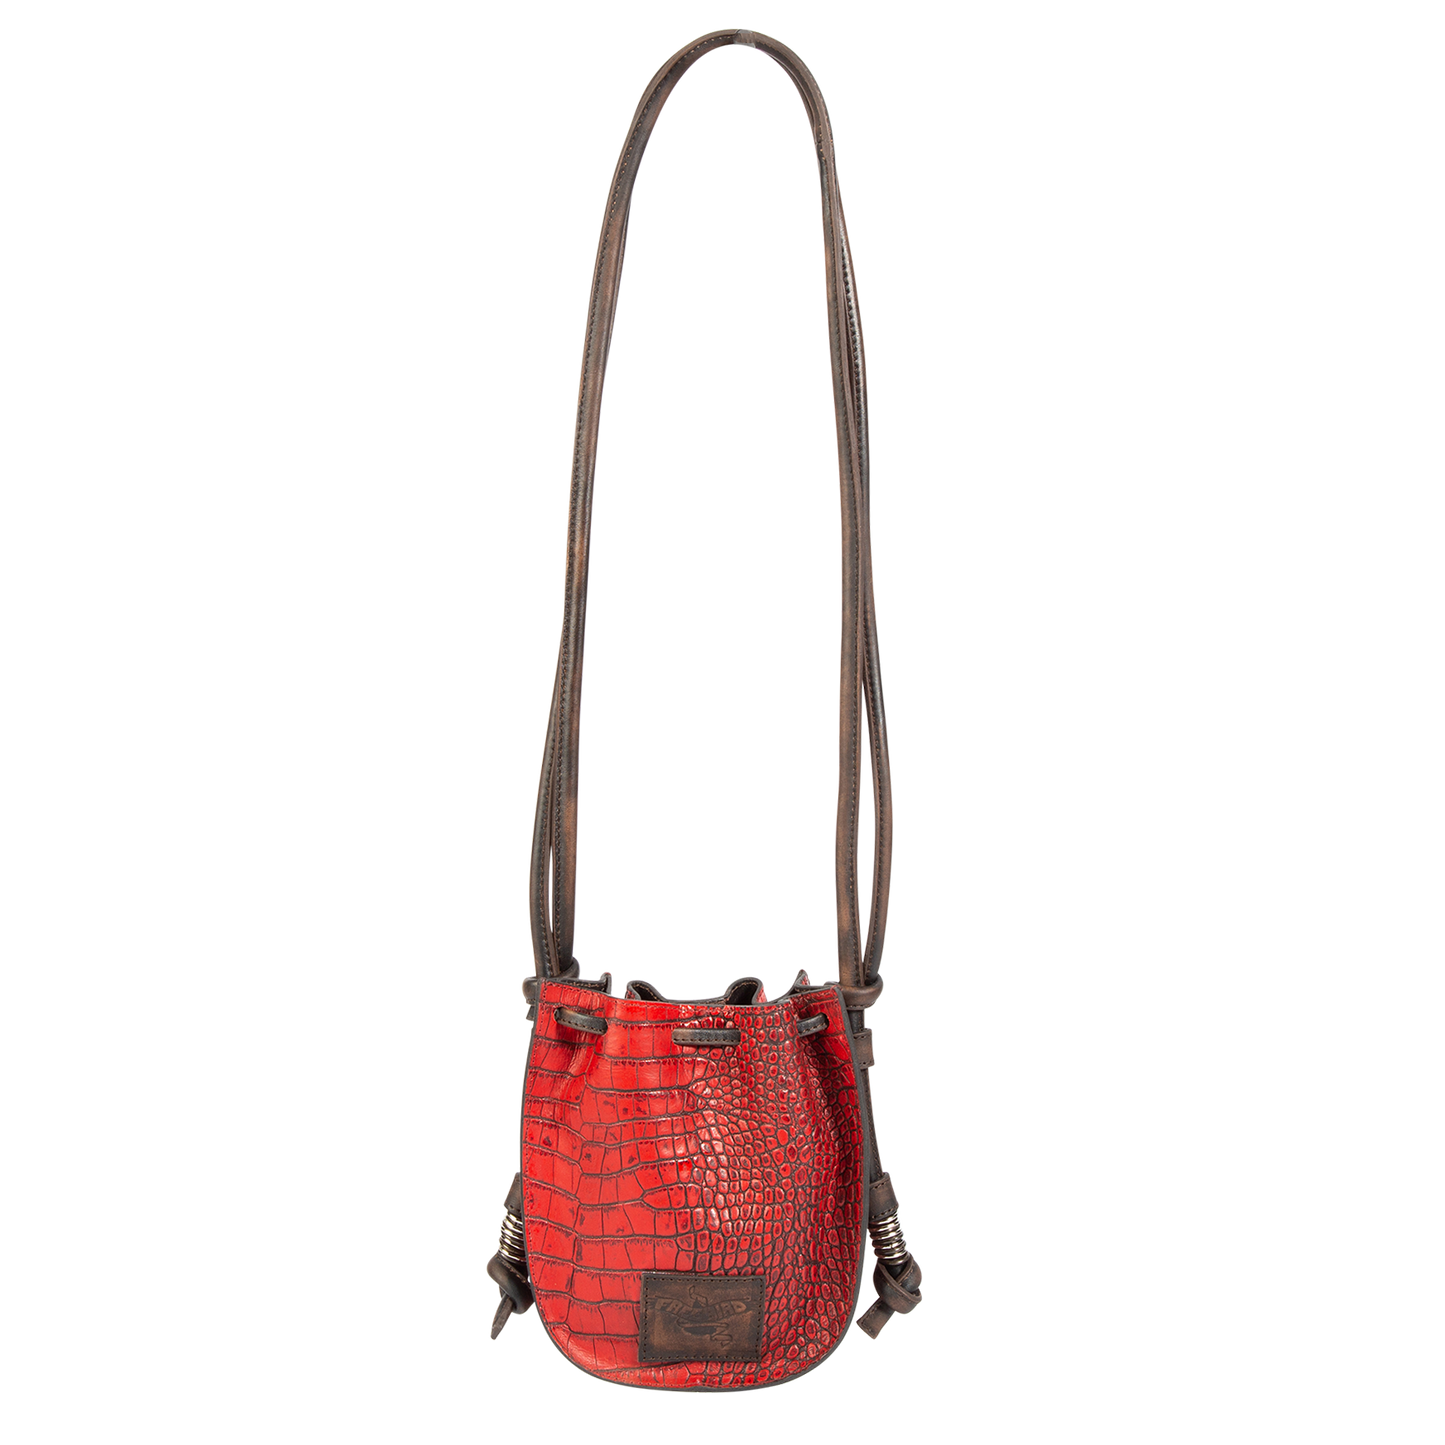 Back view showing leather shoulder straps and leather drawstring closure on FREEBIRD Stella red croco embossed leather bag